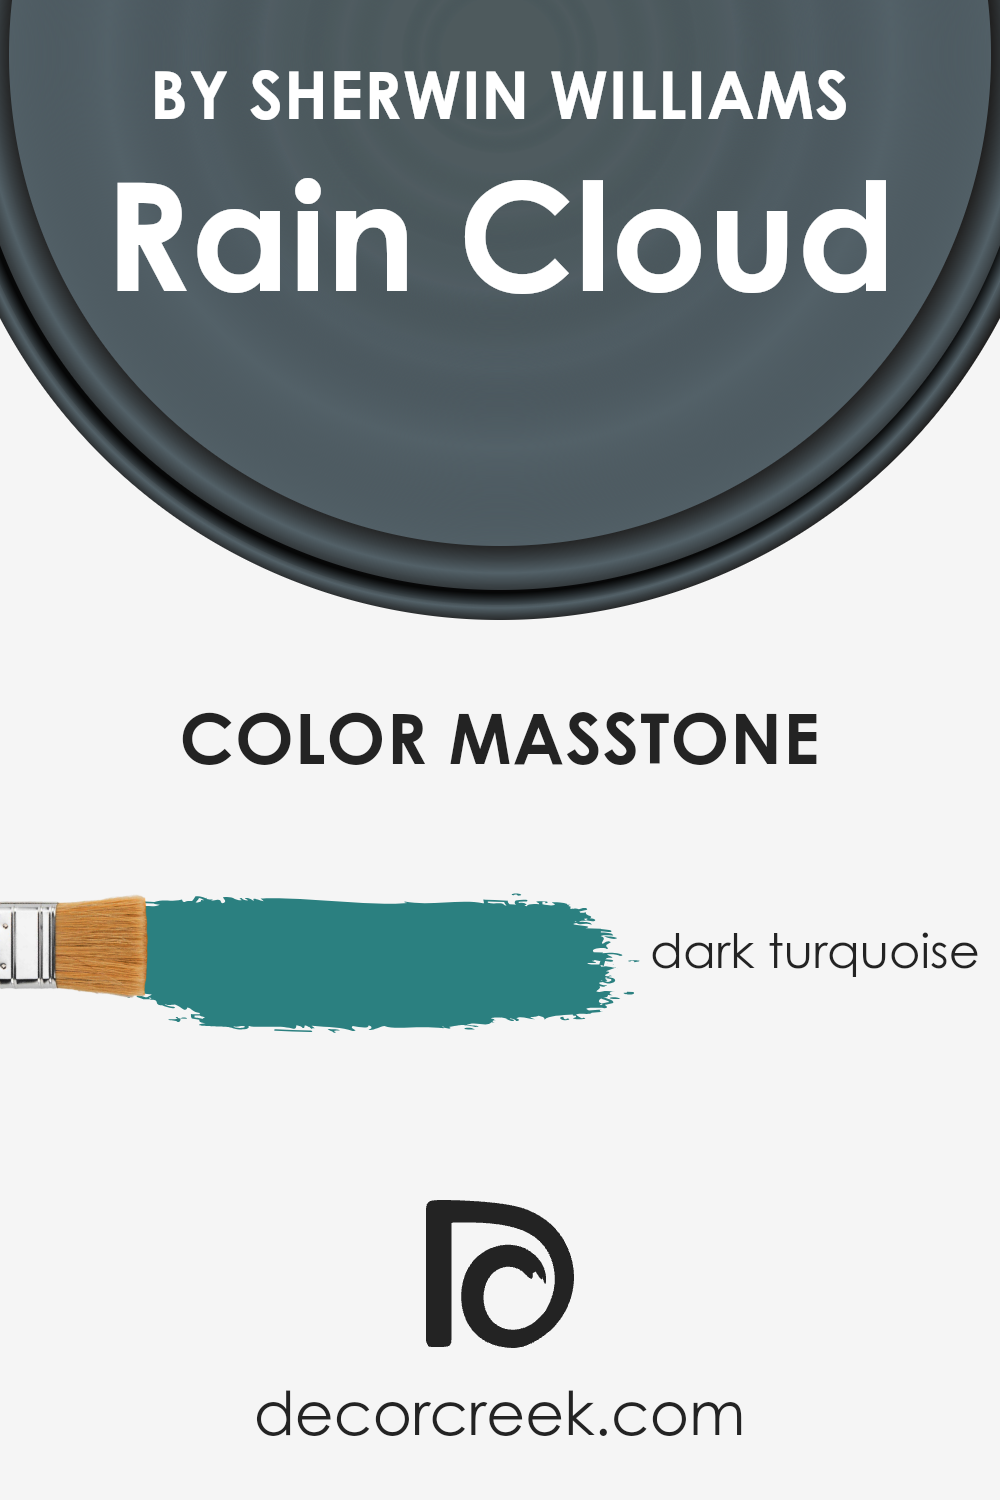 what_is_the_masstone_of_rain_cloud_sw_9639